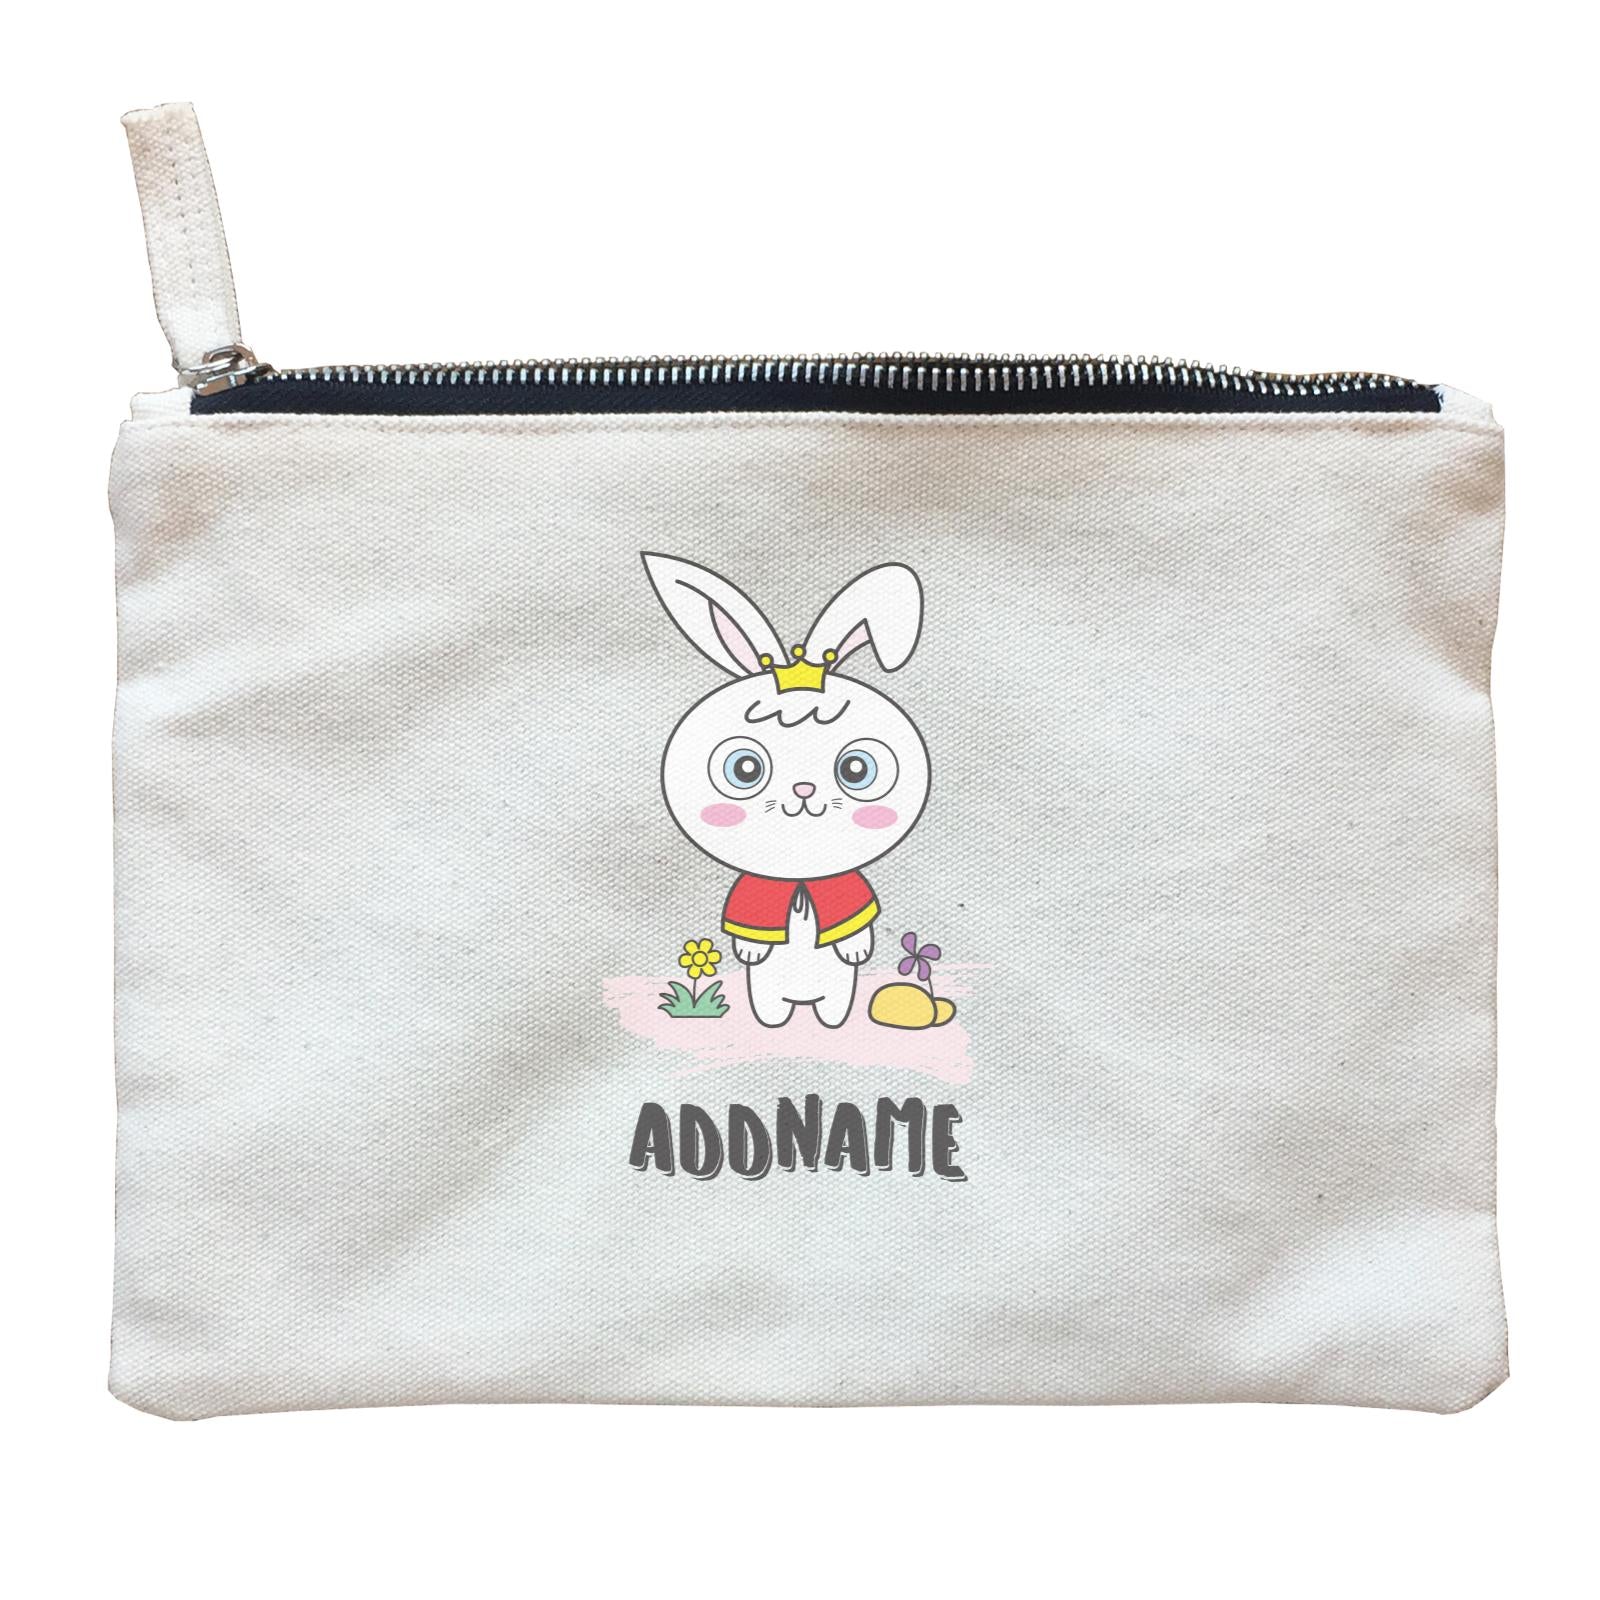 Cool Cute Animals Rabbit Rabbit With Crown Addname Zipper Pouch